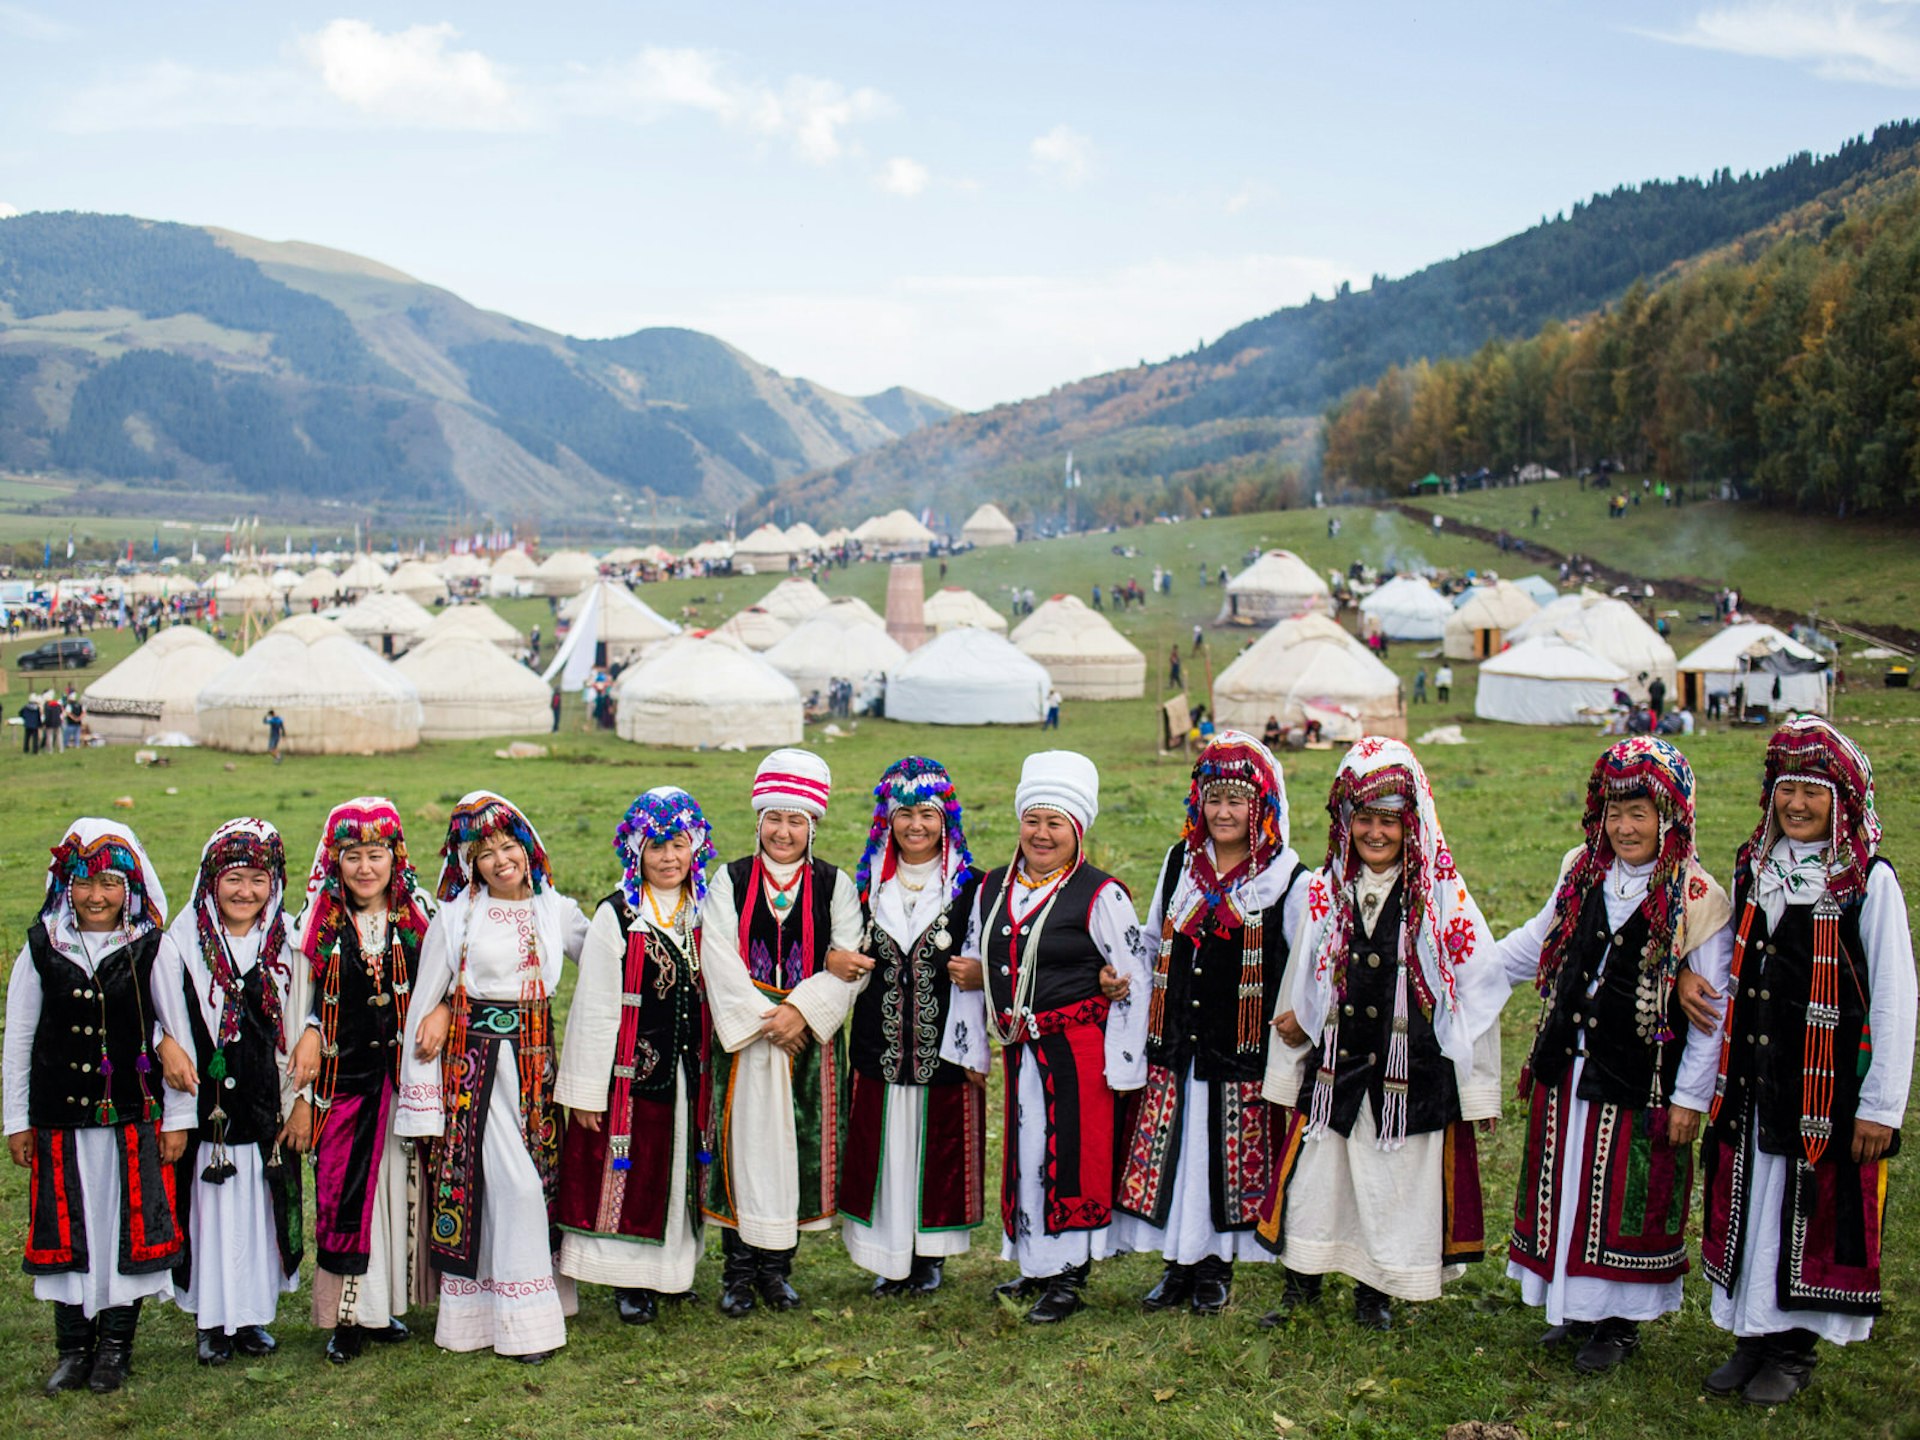 Southern Kyrgyzstan women in traditional dress at the World Nomad Games yurt camp at Kyrchyn Jailoo © Stephen Lioy / Lonely Planet